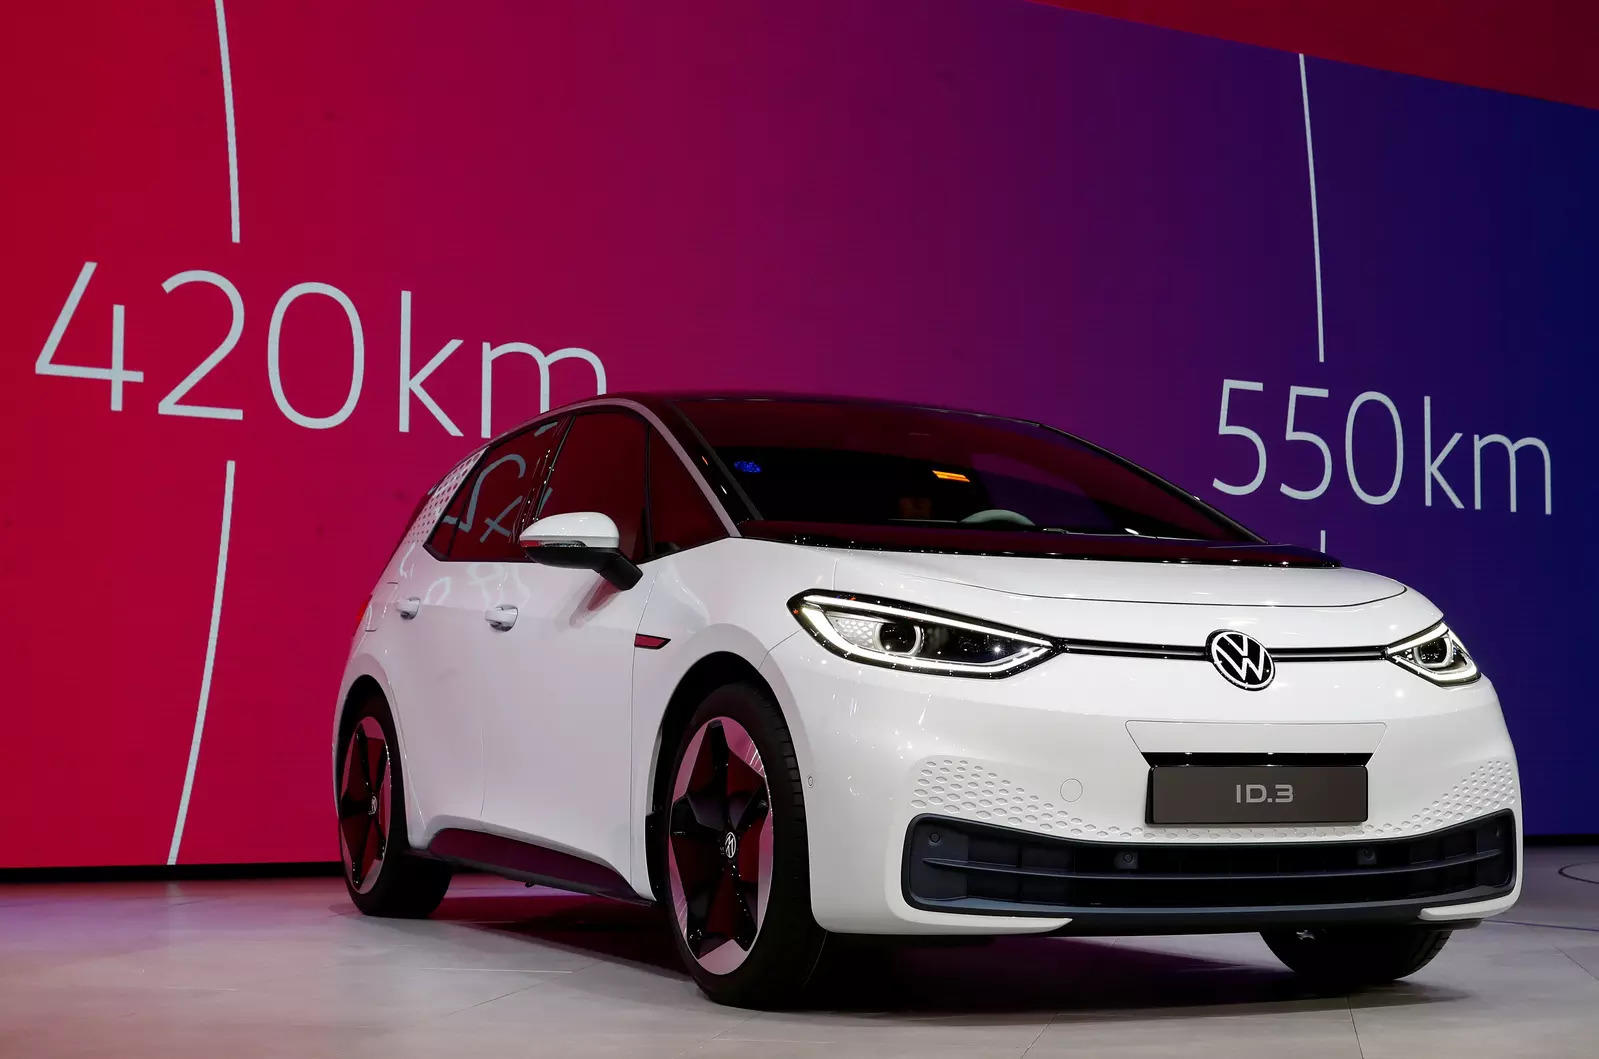 VW's all-electric ID.3 became the second best-selling car in Europe last December, and the brand has US e-mobility pioneer Tesla in its sights with its 2021 ID.4 SUV model.